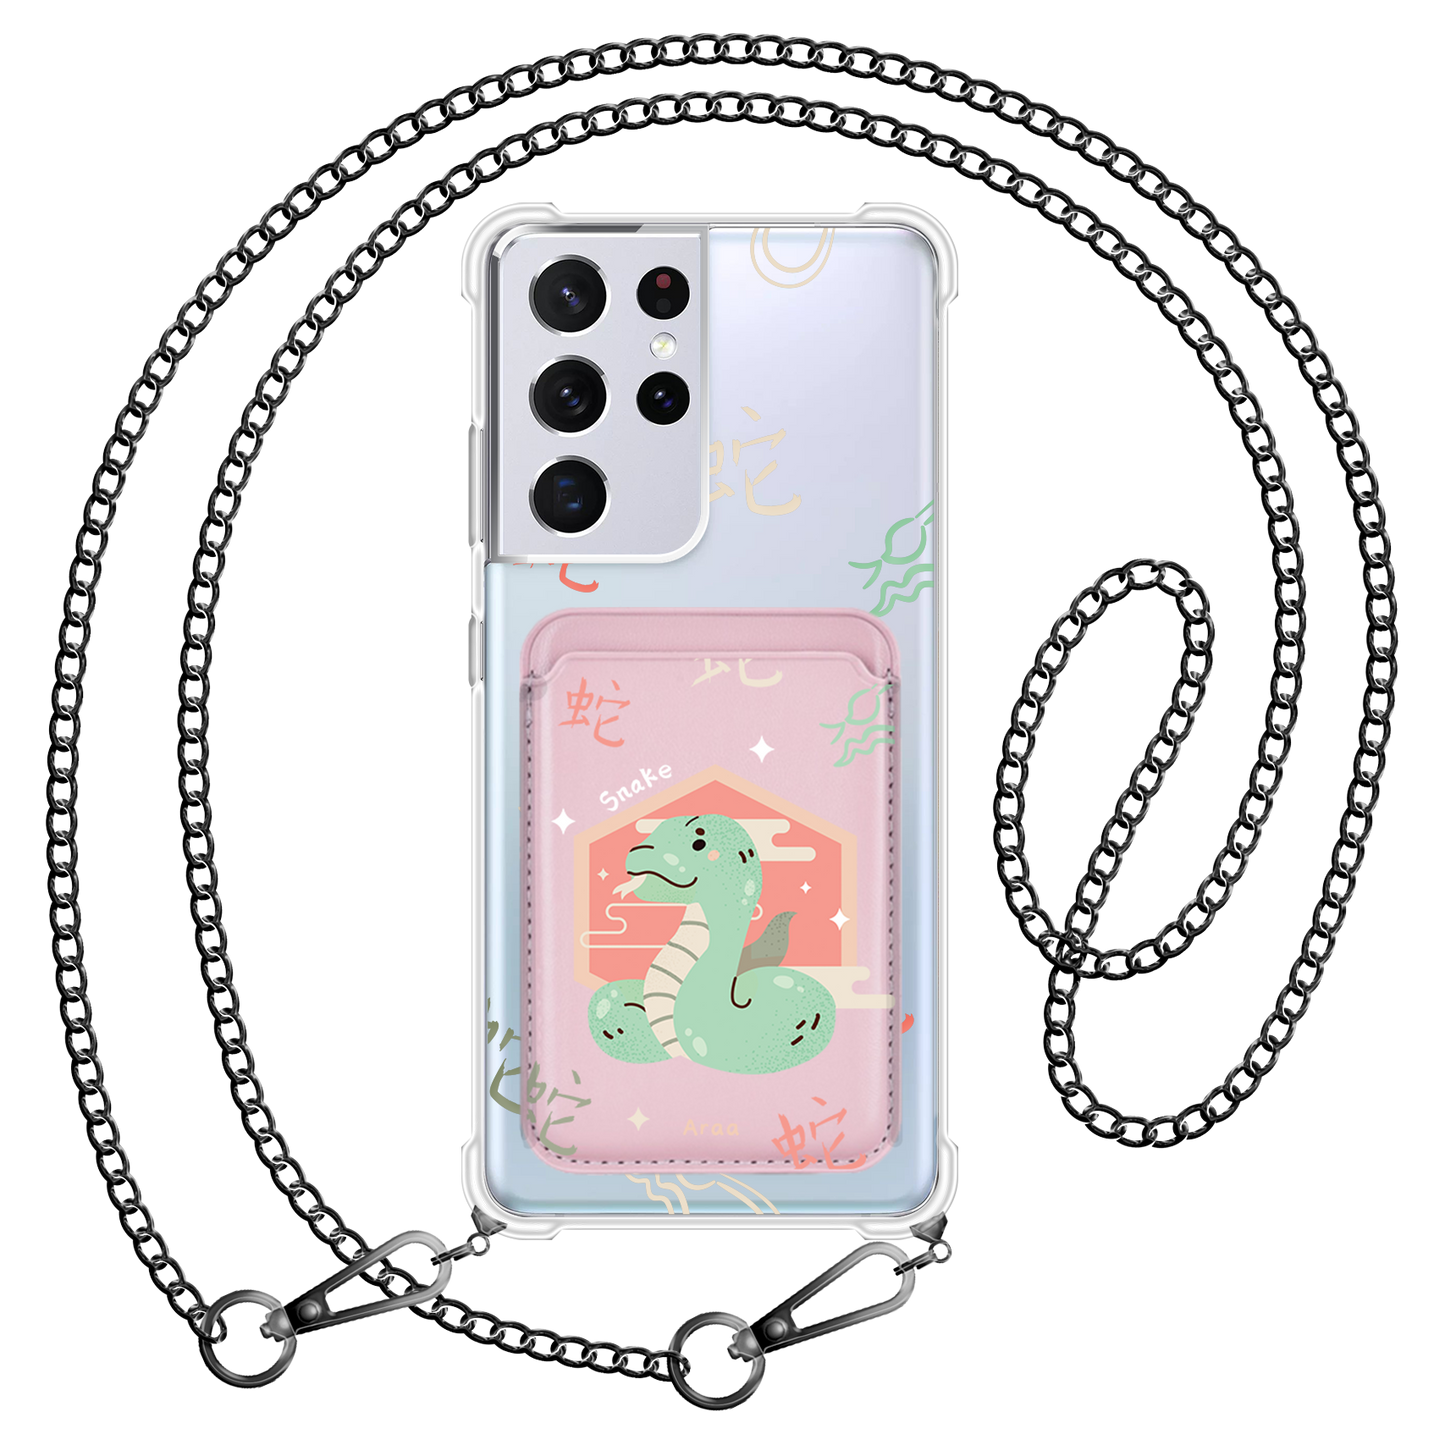 Android Magnetic Wallet Case - Snake (Chinese Zodiac / Shio)